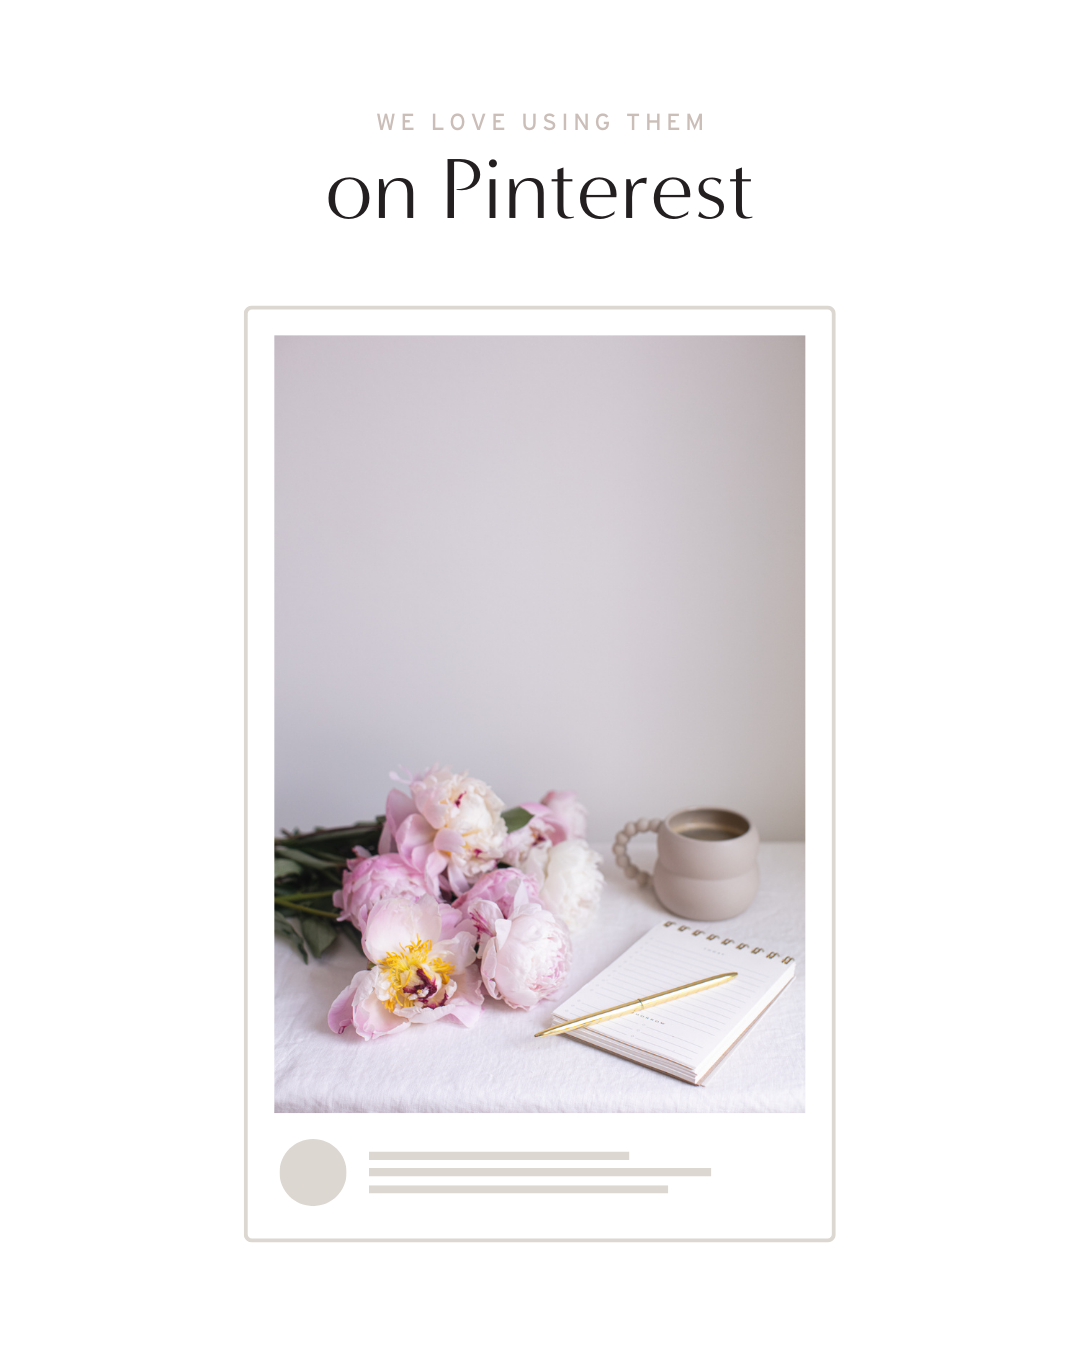 A graphic showing how to use our stock photo on Pinterest as a pin. The photo we used in the pin features pink peonies, a white notebook and a nude colored mug in a beautiful flatlay setting.